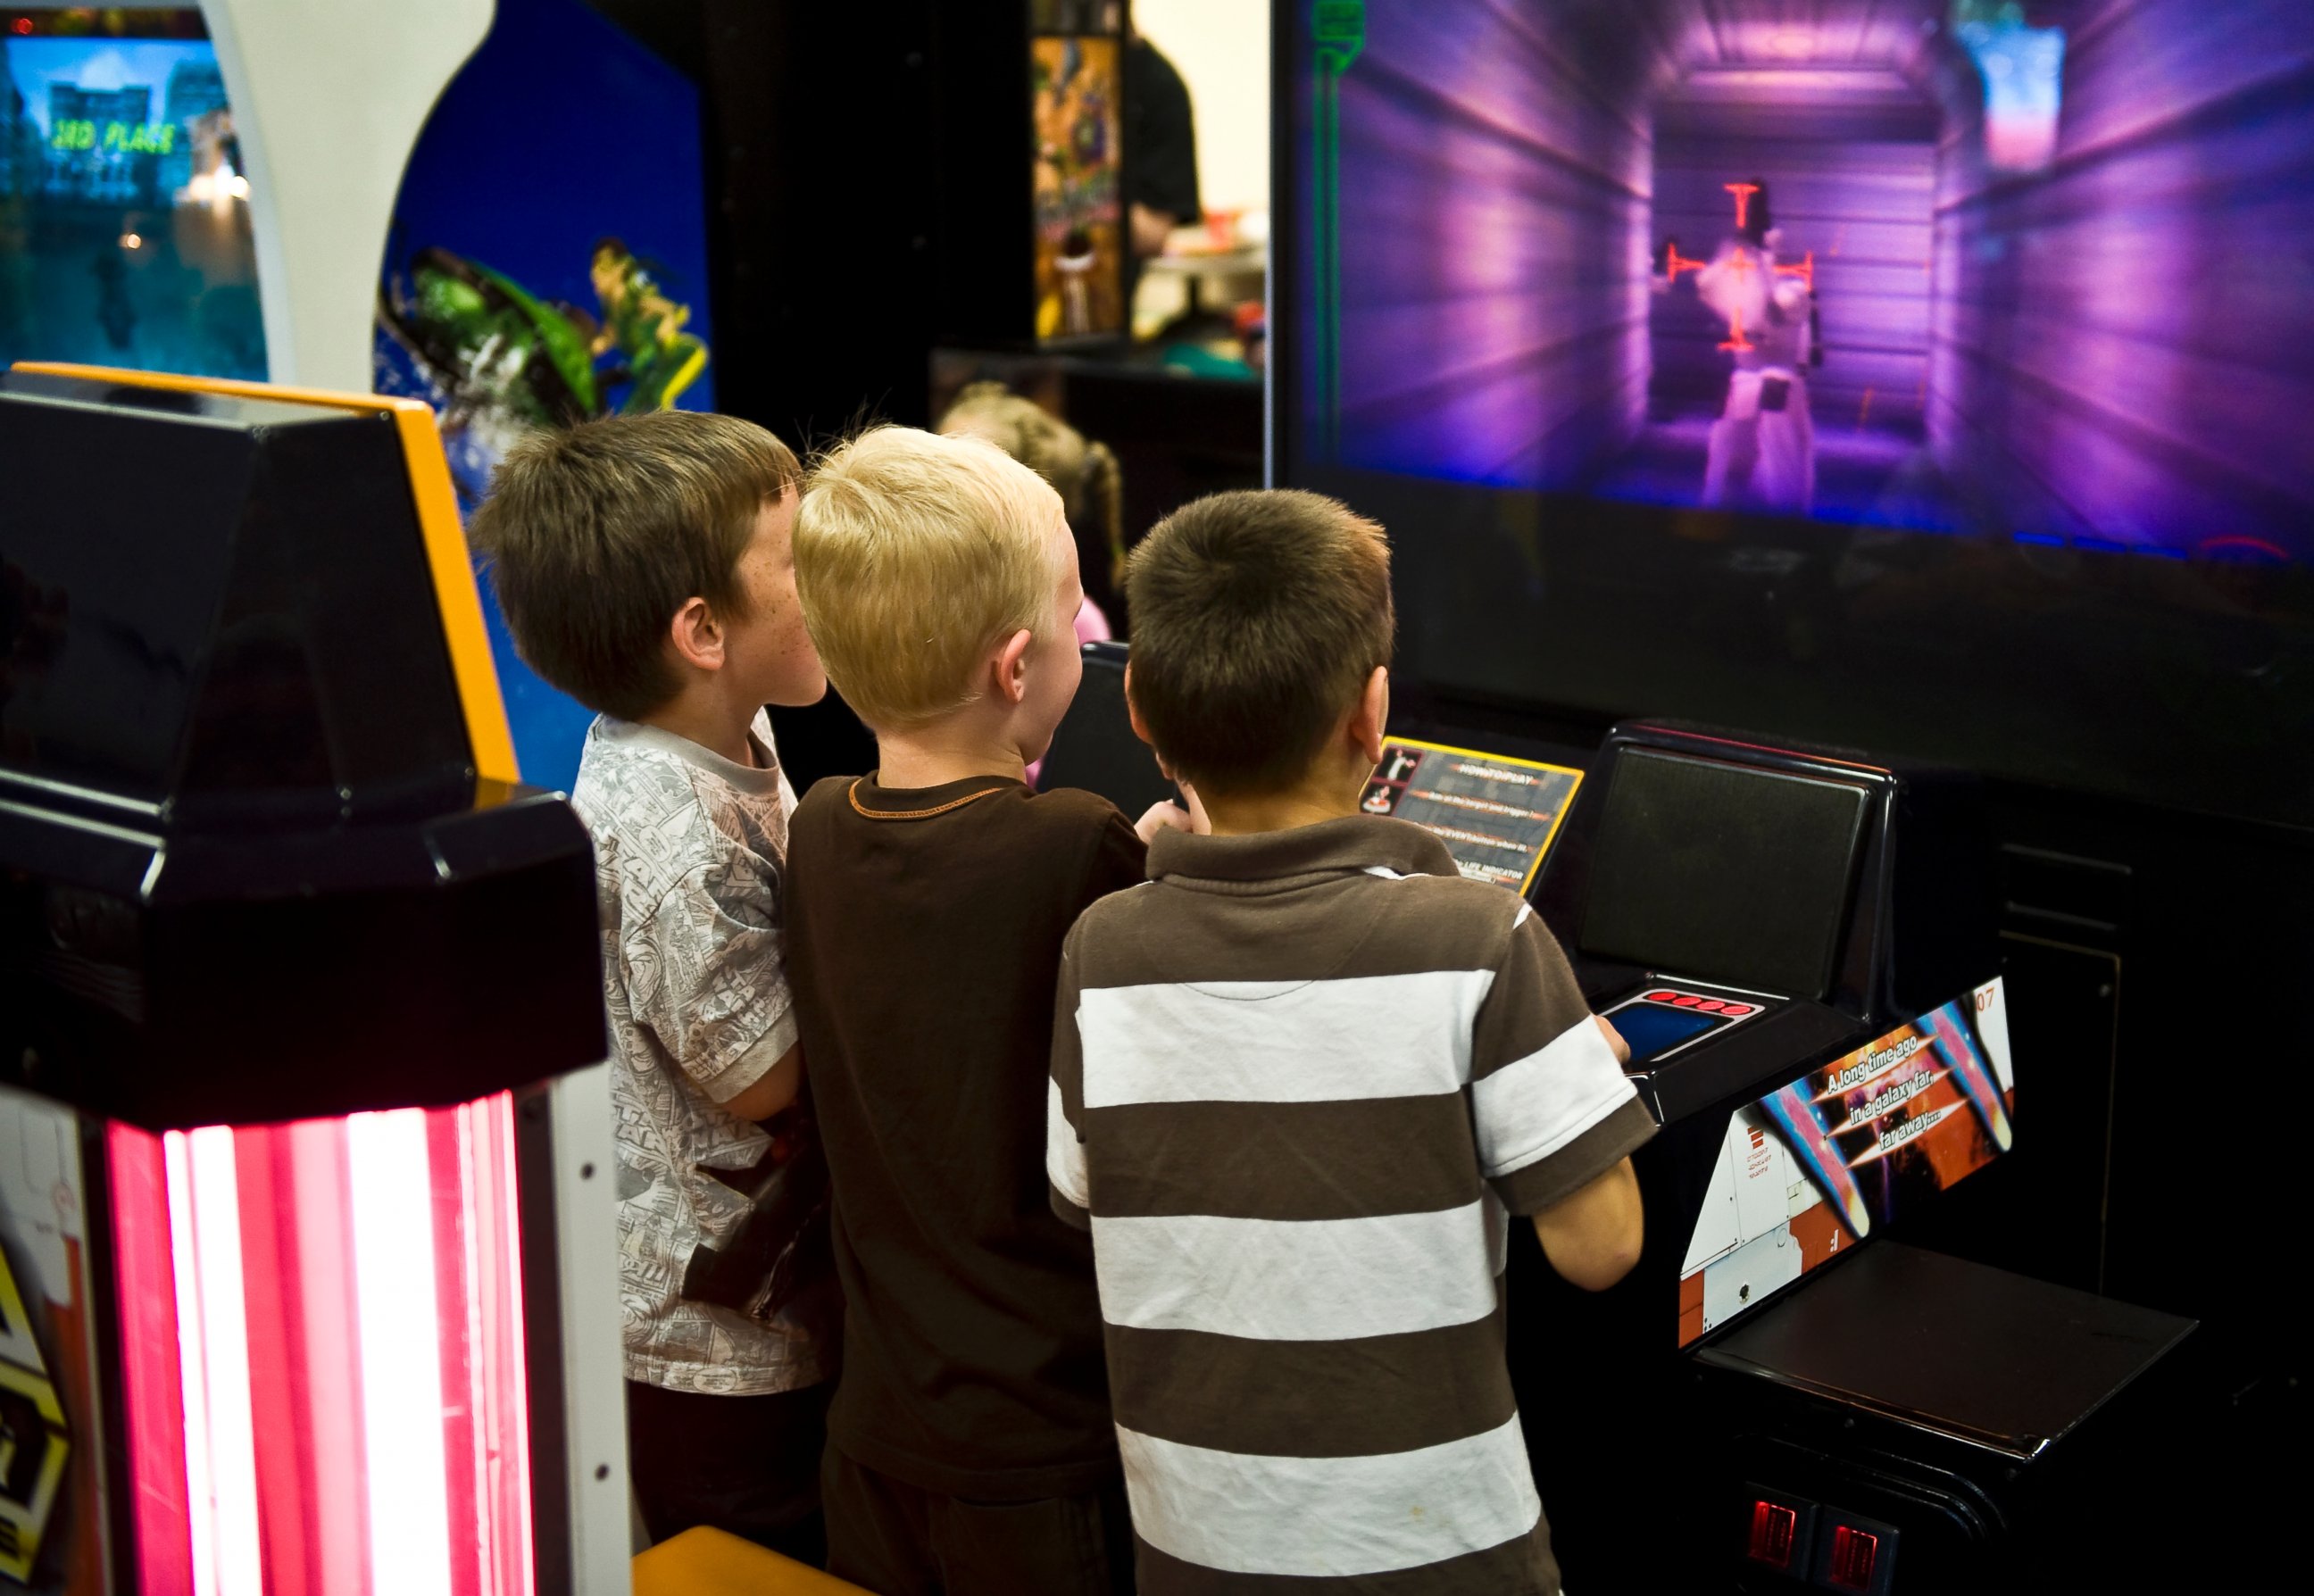 PHOTO: Boys playing a video game in an arcade are seen in this undated file photo.